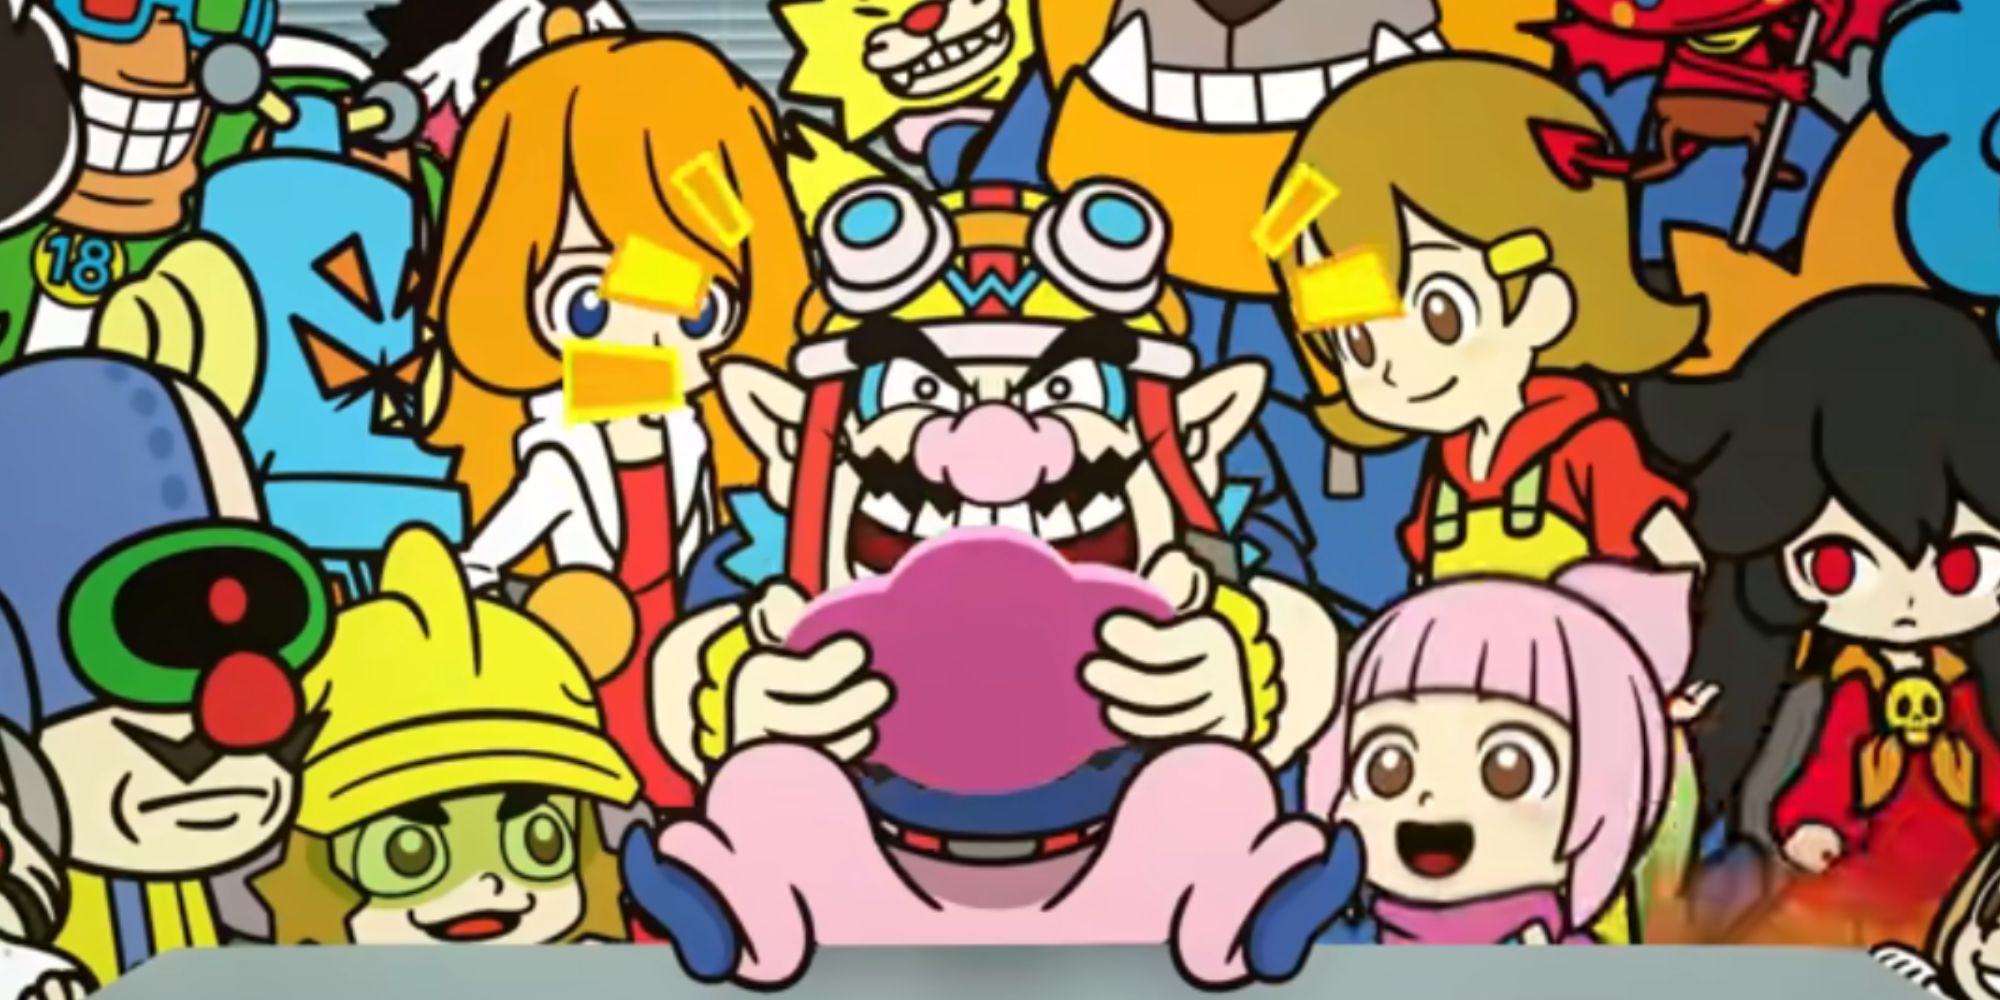 Wario sits at a table playing a handheld console surrounded by his friends